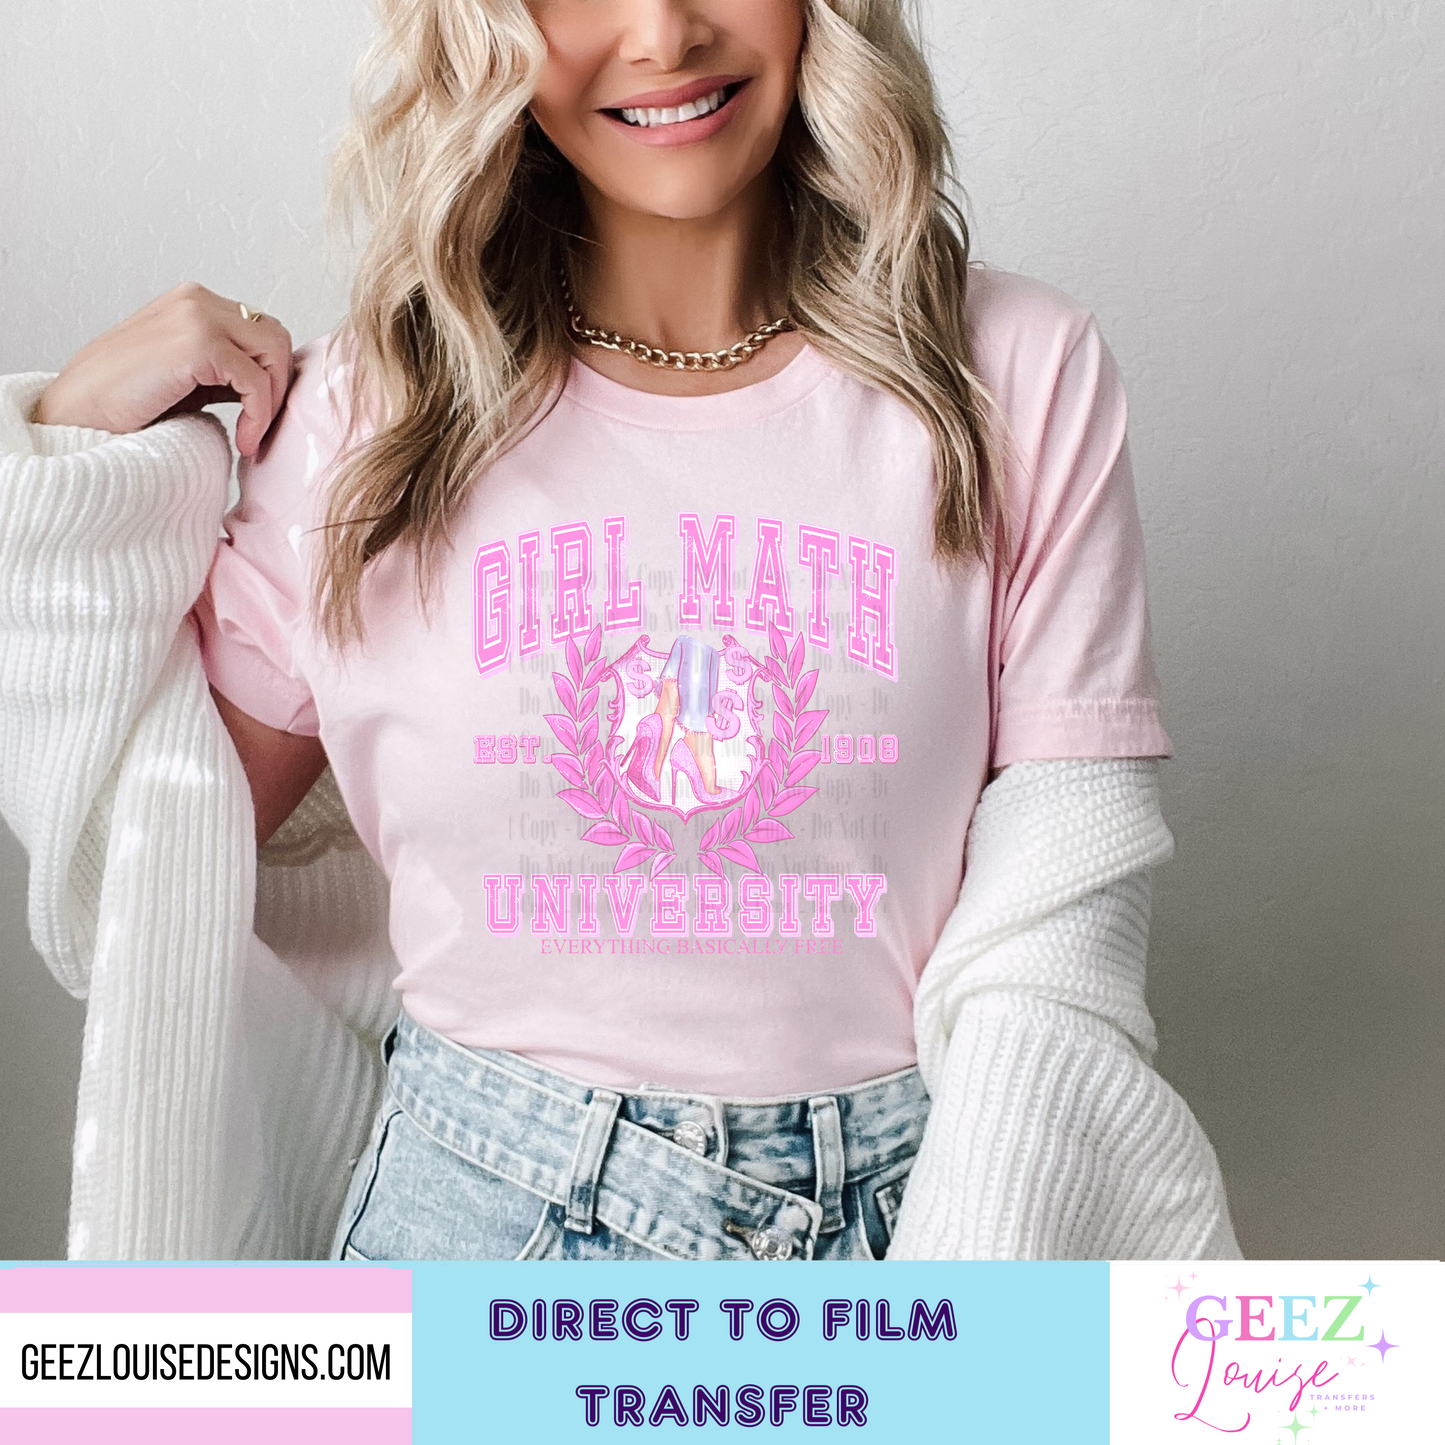 Girl math - Direct to Film Transfer - made to order